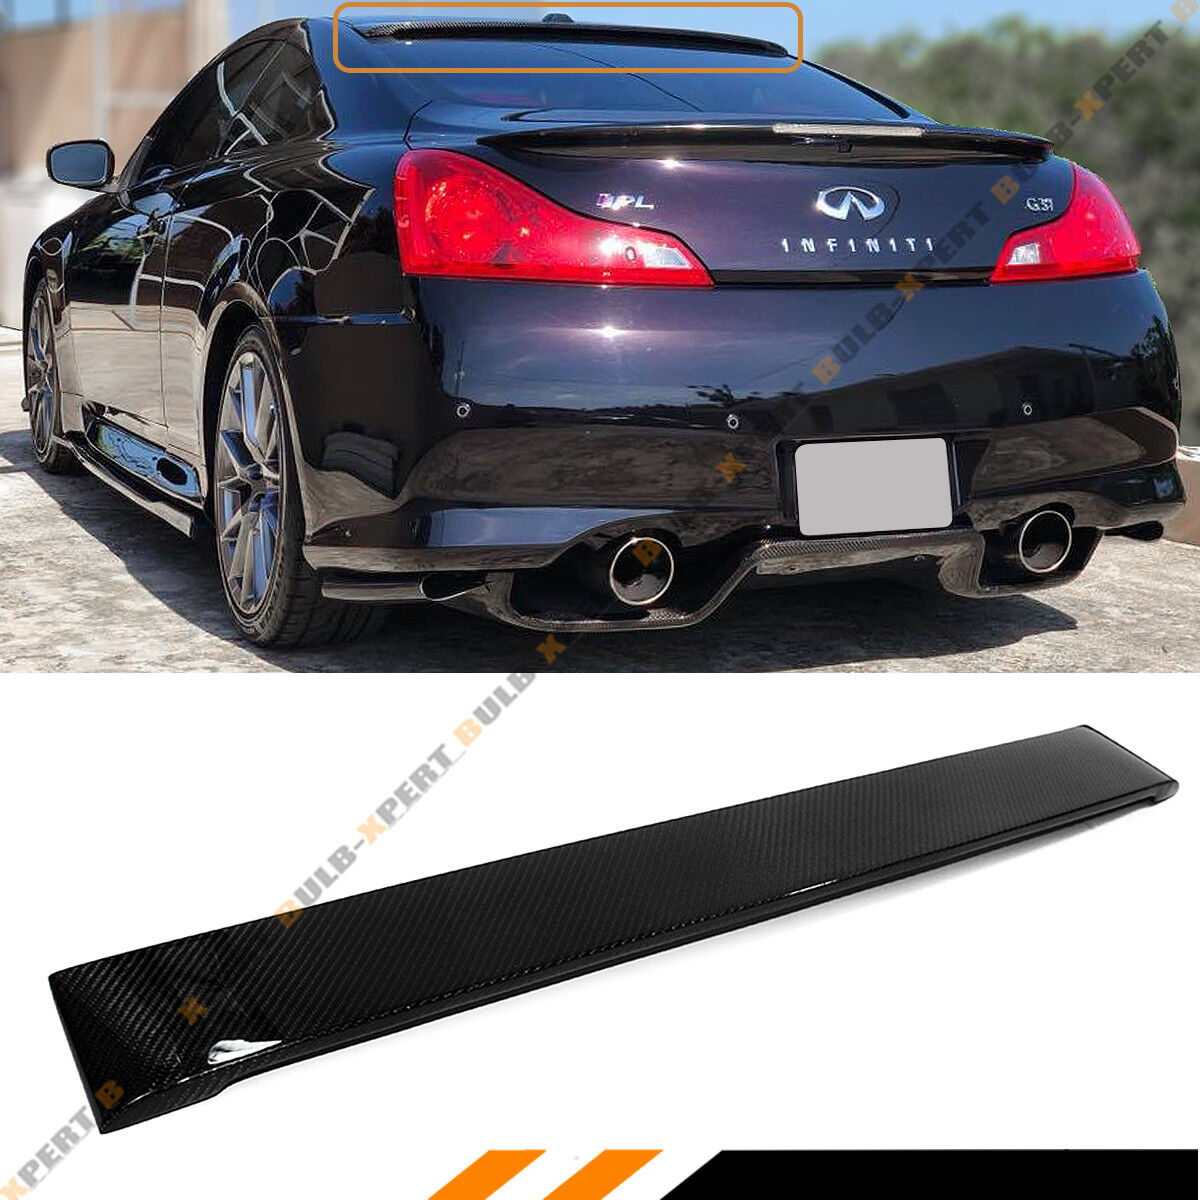 FITS FOR INFINITI G37 2 DR COUPE REAL CARBON FIBER REAR ROOF SPOILER VISOR WING